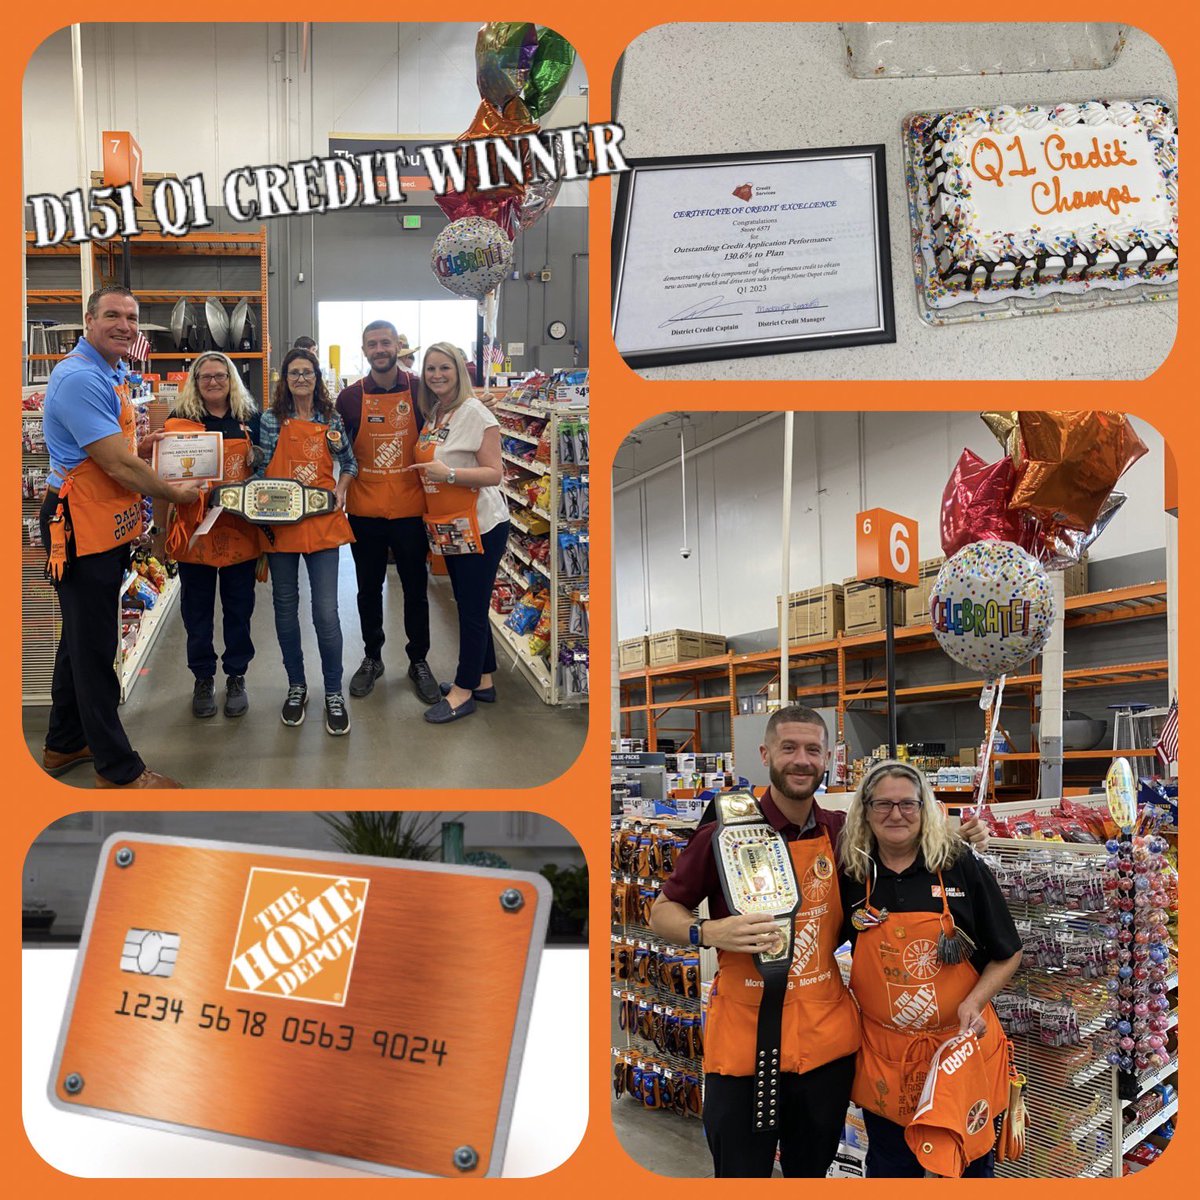 D151 Q1 CREDIT winner Celebration! Congrats to Team 6571!! Thank you for building loyalty & driving ENGAGEMENT!! #creditservices